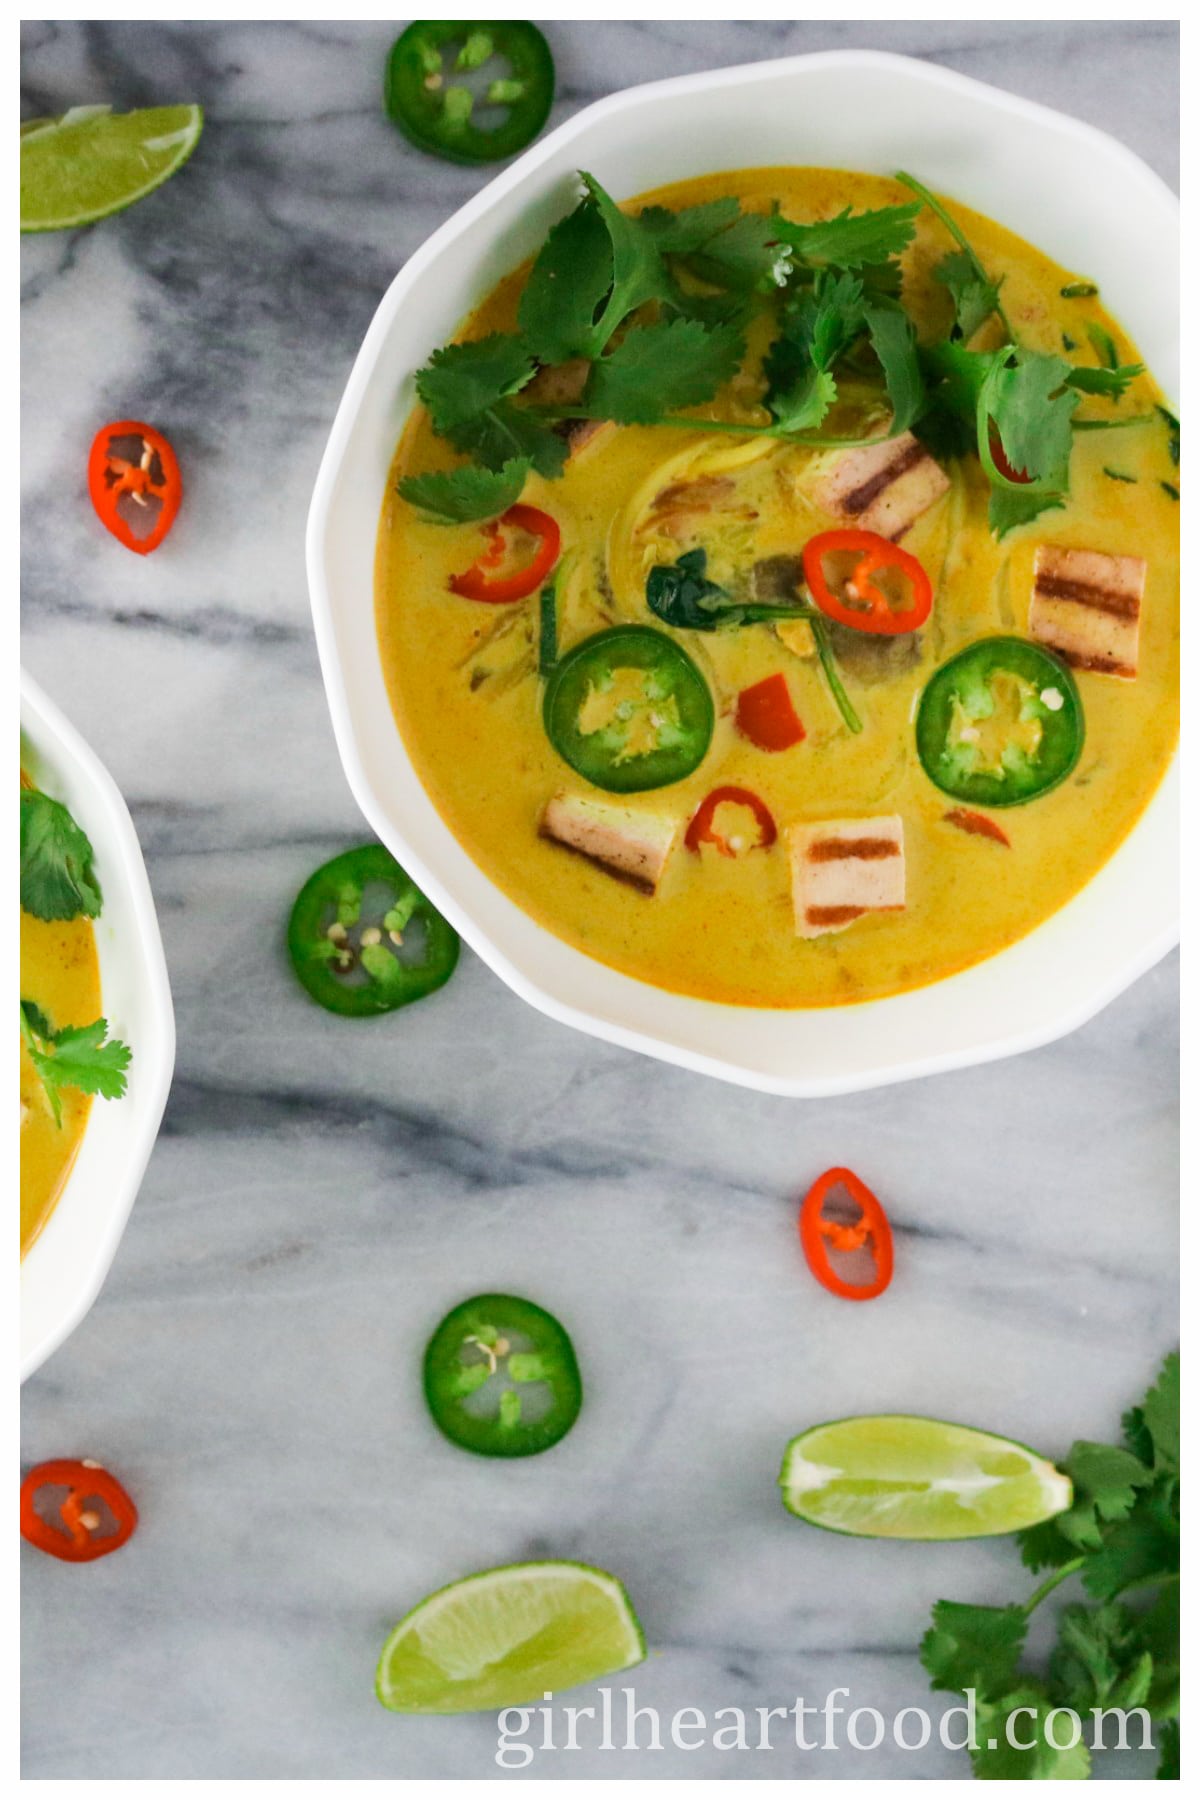 Bowl of tofu and vegetable curry coconut soup next to chili pepper, lime wedges & cilantro.